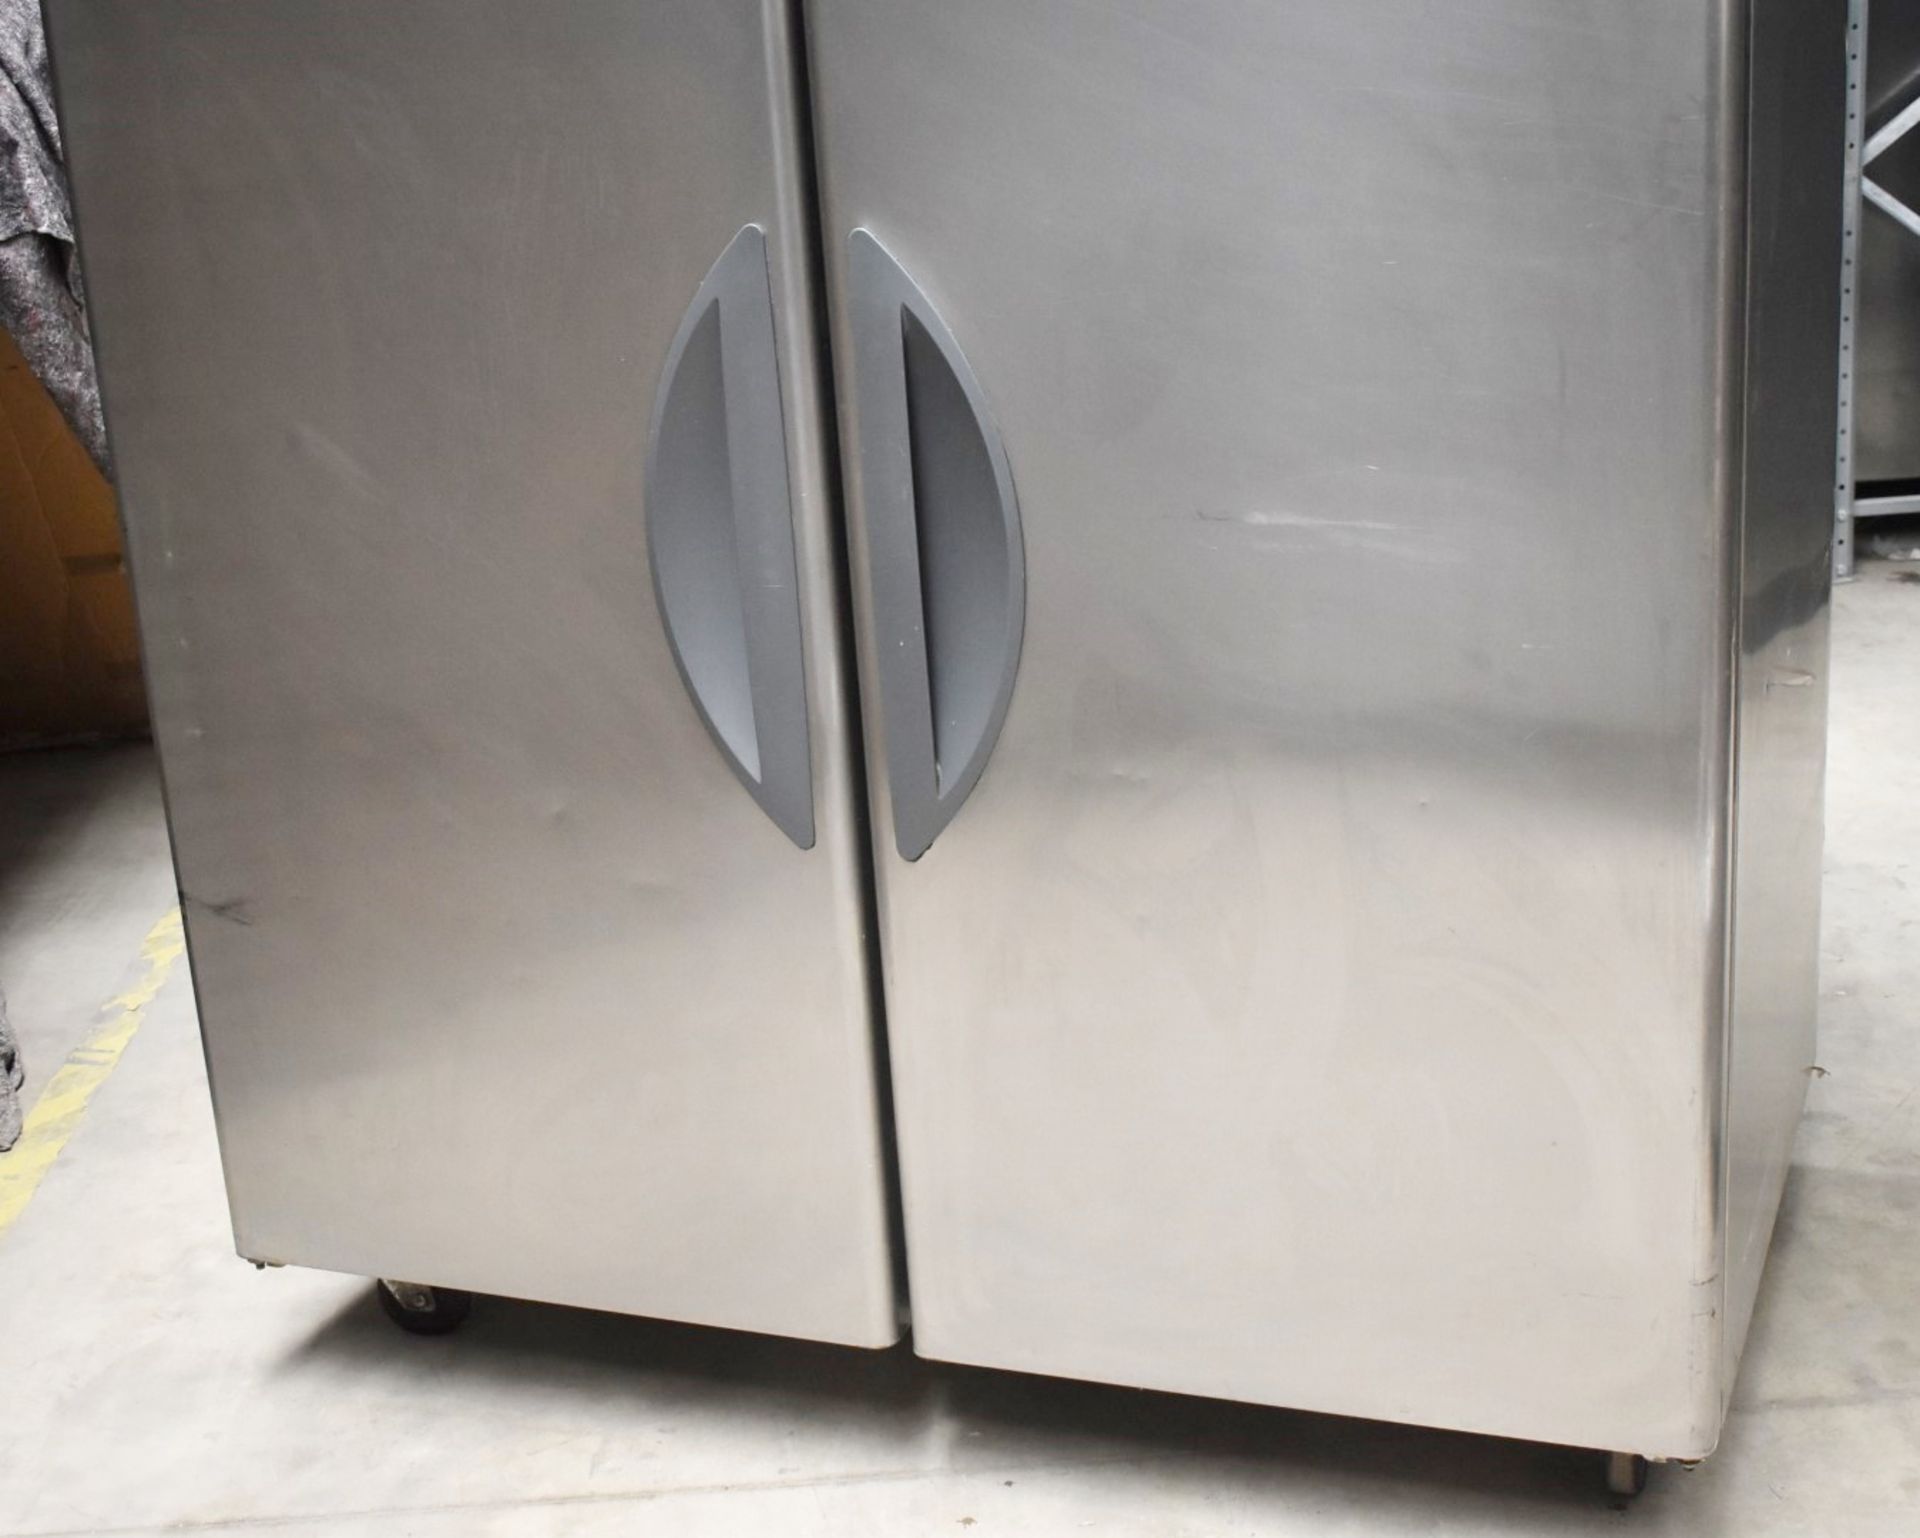 1 x Williams Double Door Upright Side by Side Refrigerator With Gastro Food Trays and Storage - Image 8 of 18